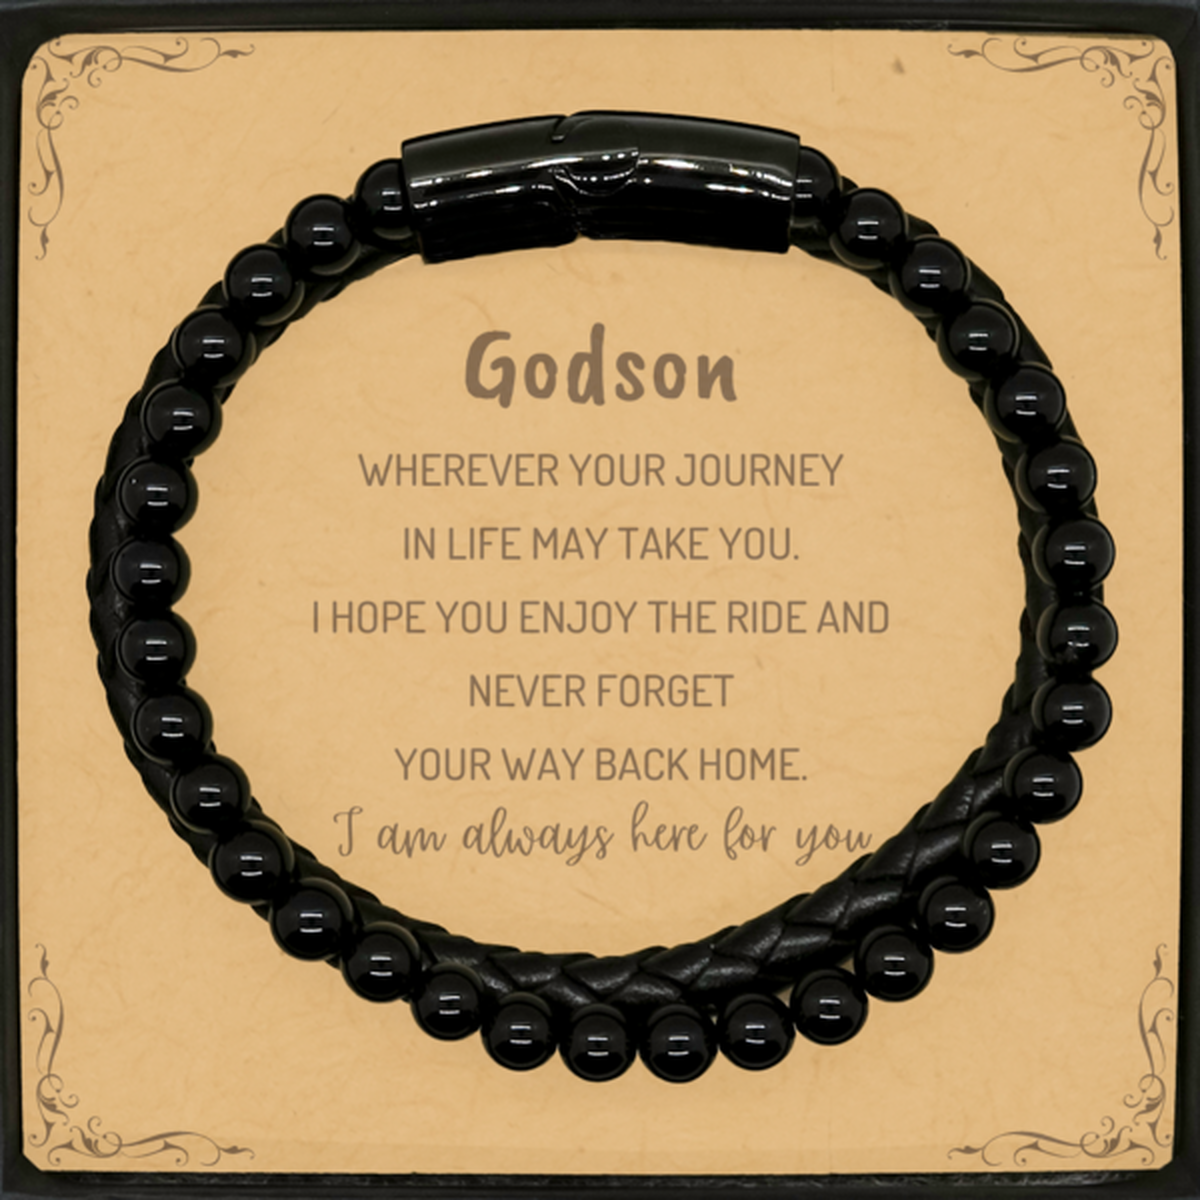 Godson wherever your journey in life may take you, I am always here for you Godson Stone Leather Bracelets, Awesome Christmas Gifts For Godson Message Card, Godson Birthday Gifts for Men Women Family Loved One